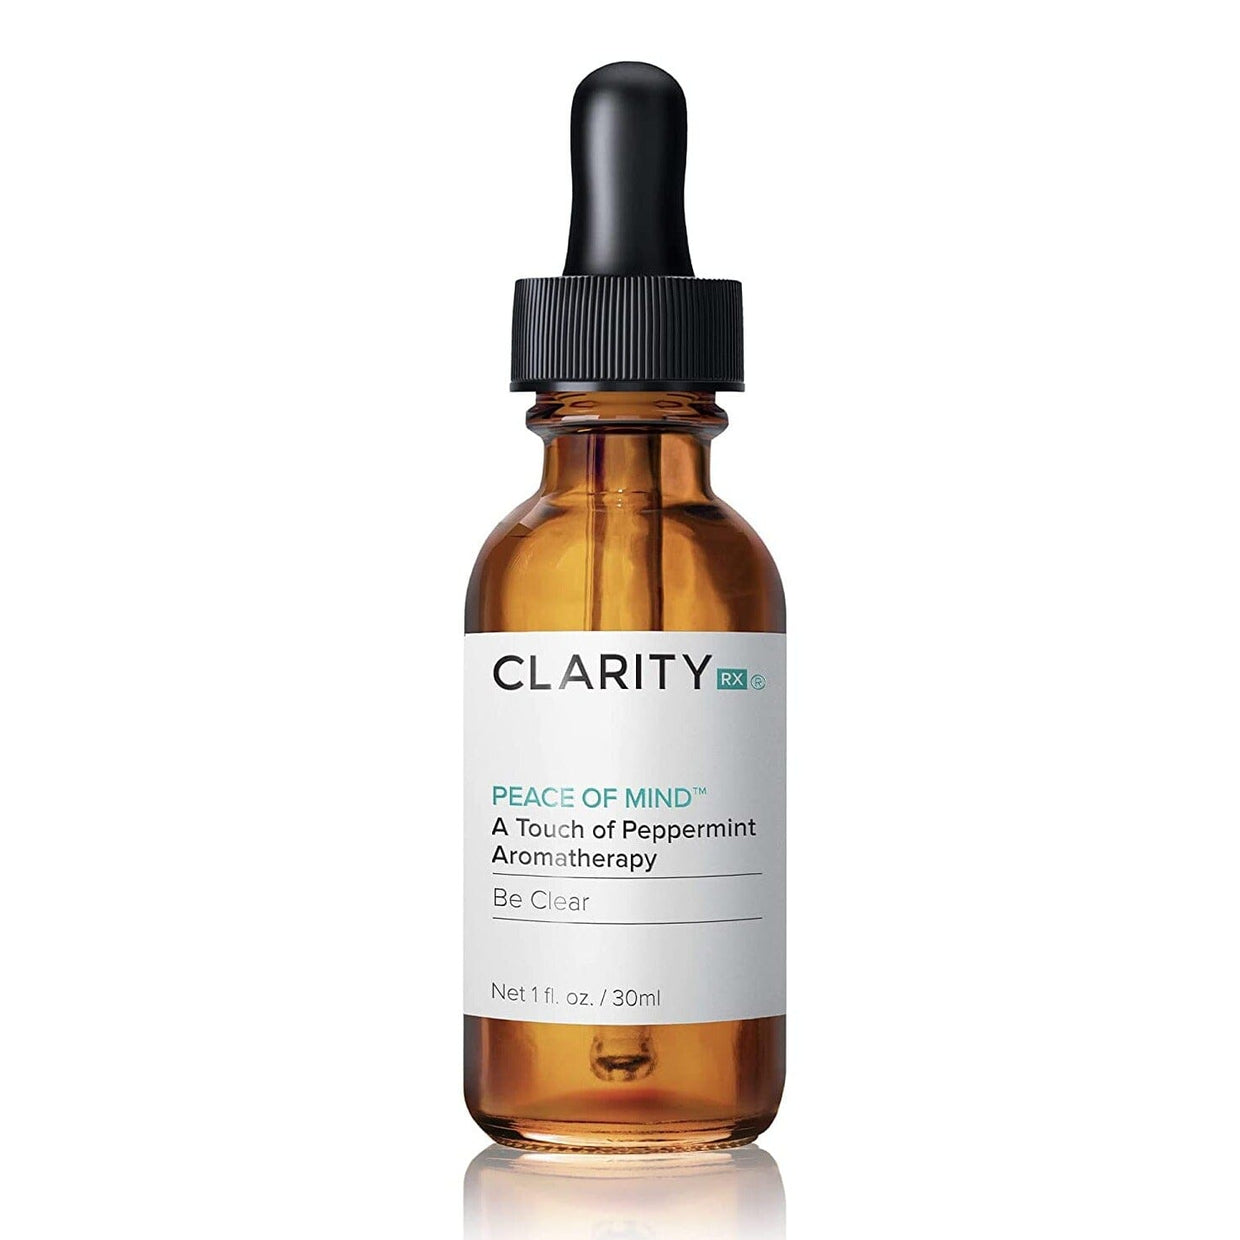 ClarityRx Peace of Mind Be Clear A Touch of Peppermint Aromatherapy ClarityRx 1 fl. oz. Shop at Exclusive Beauty Club